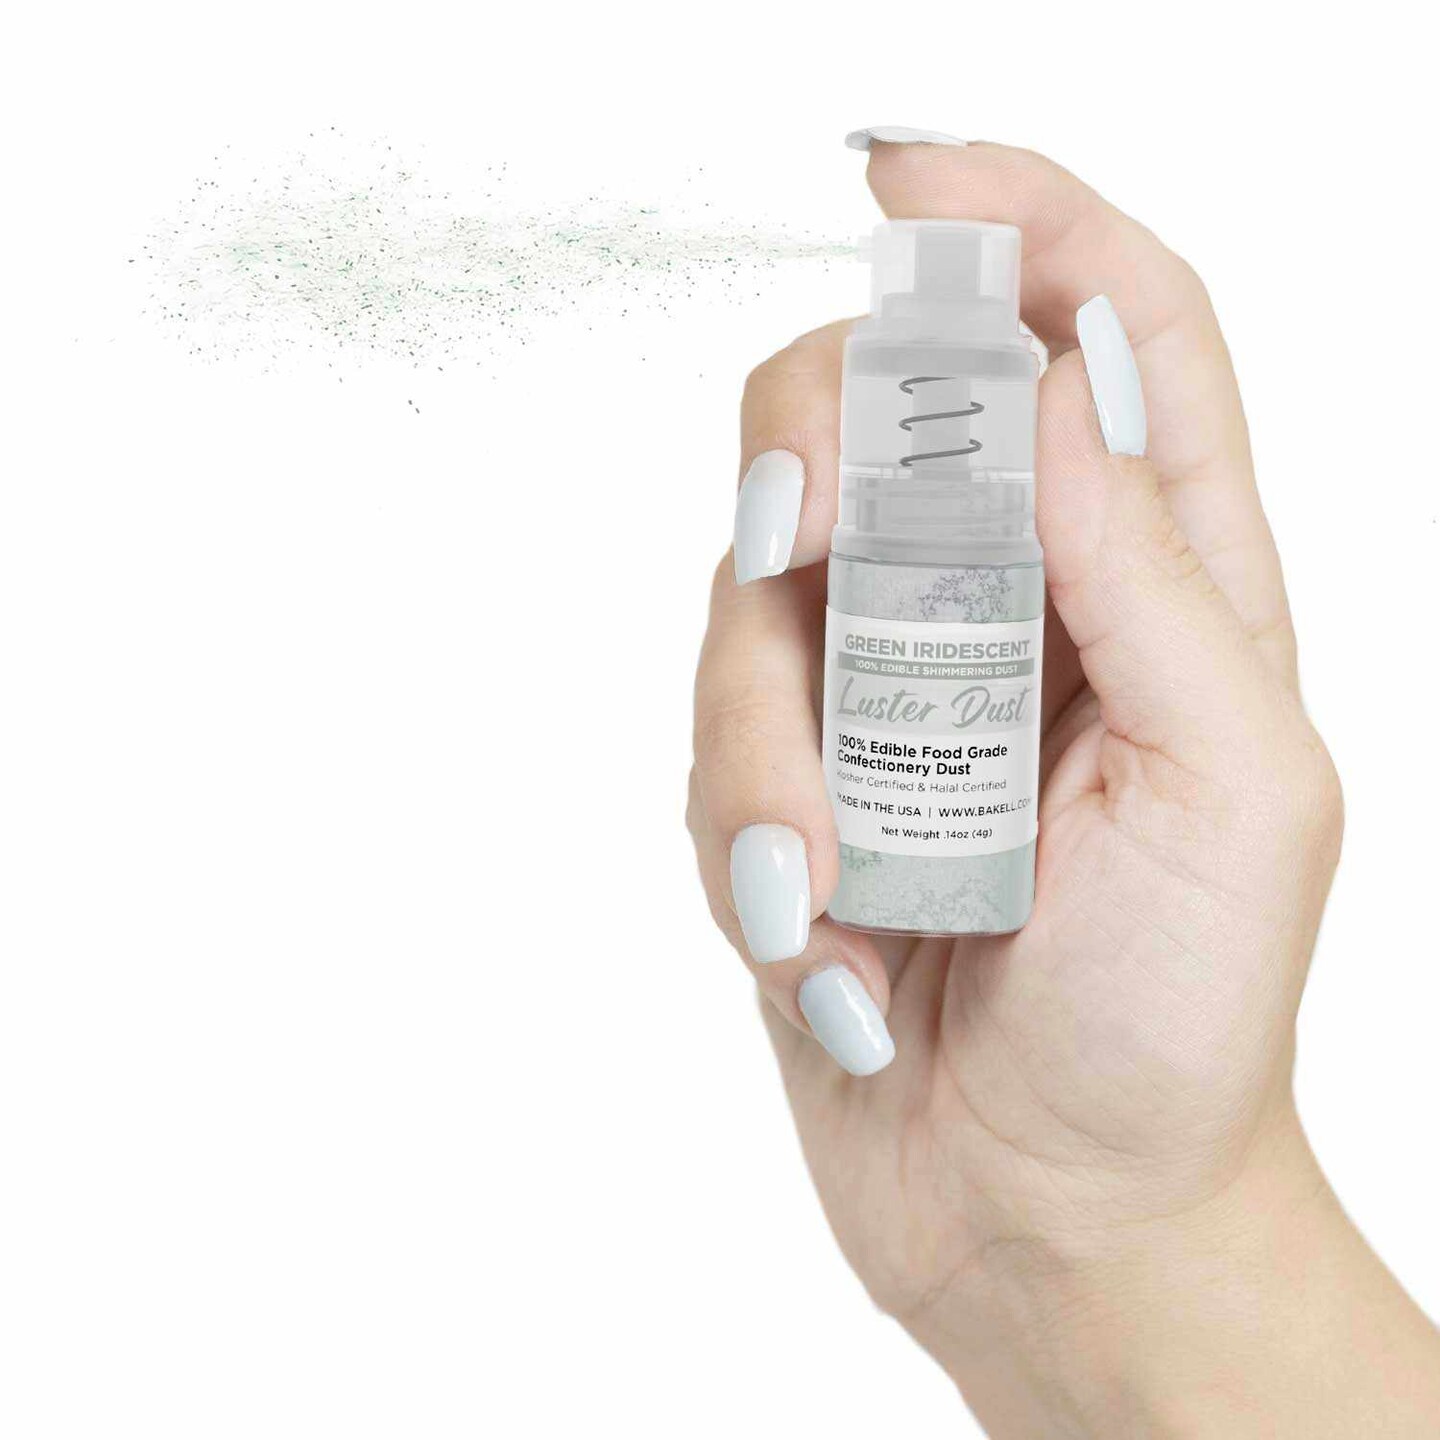 Green Iridescent Luster Dust Spray | Luster Dust Edible Glitter Spray Dust for Cakes, Cookies, Desserts, Paint. FDA Compliant (4 Gram Pump)